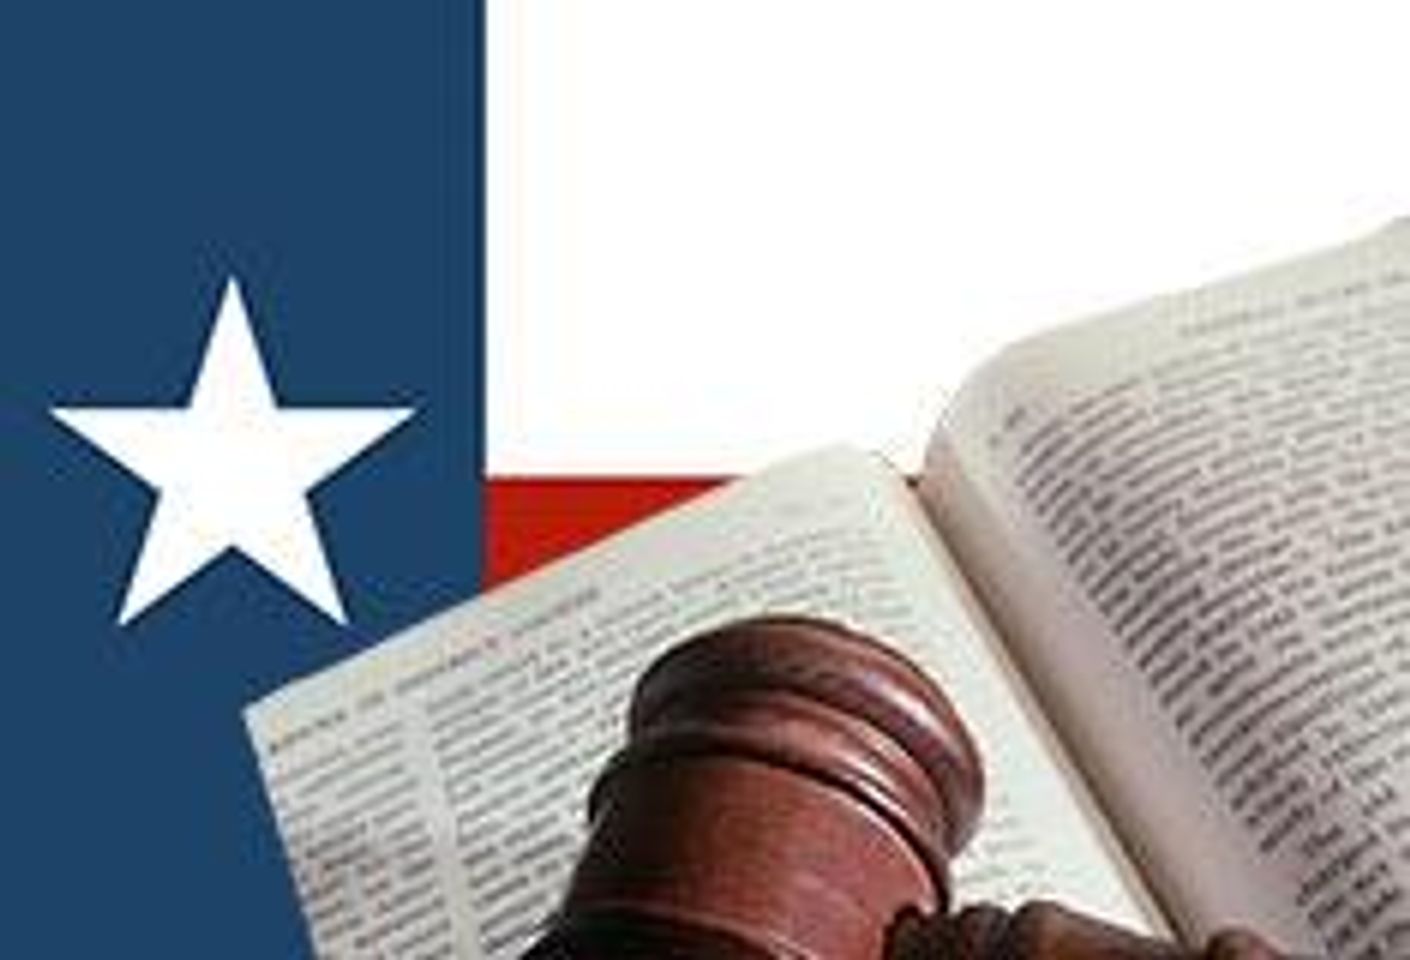 Stay Granted In Houston Adult Ordinance